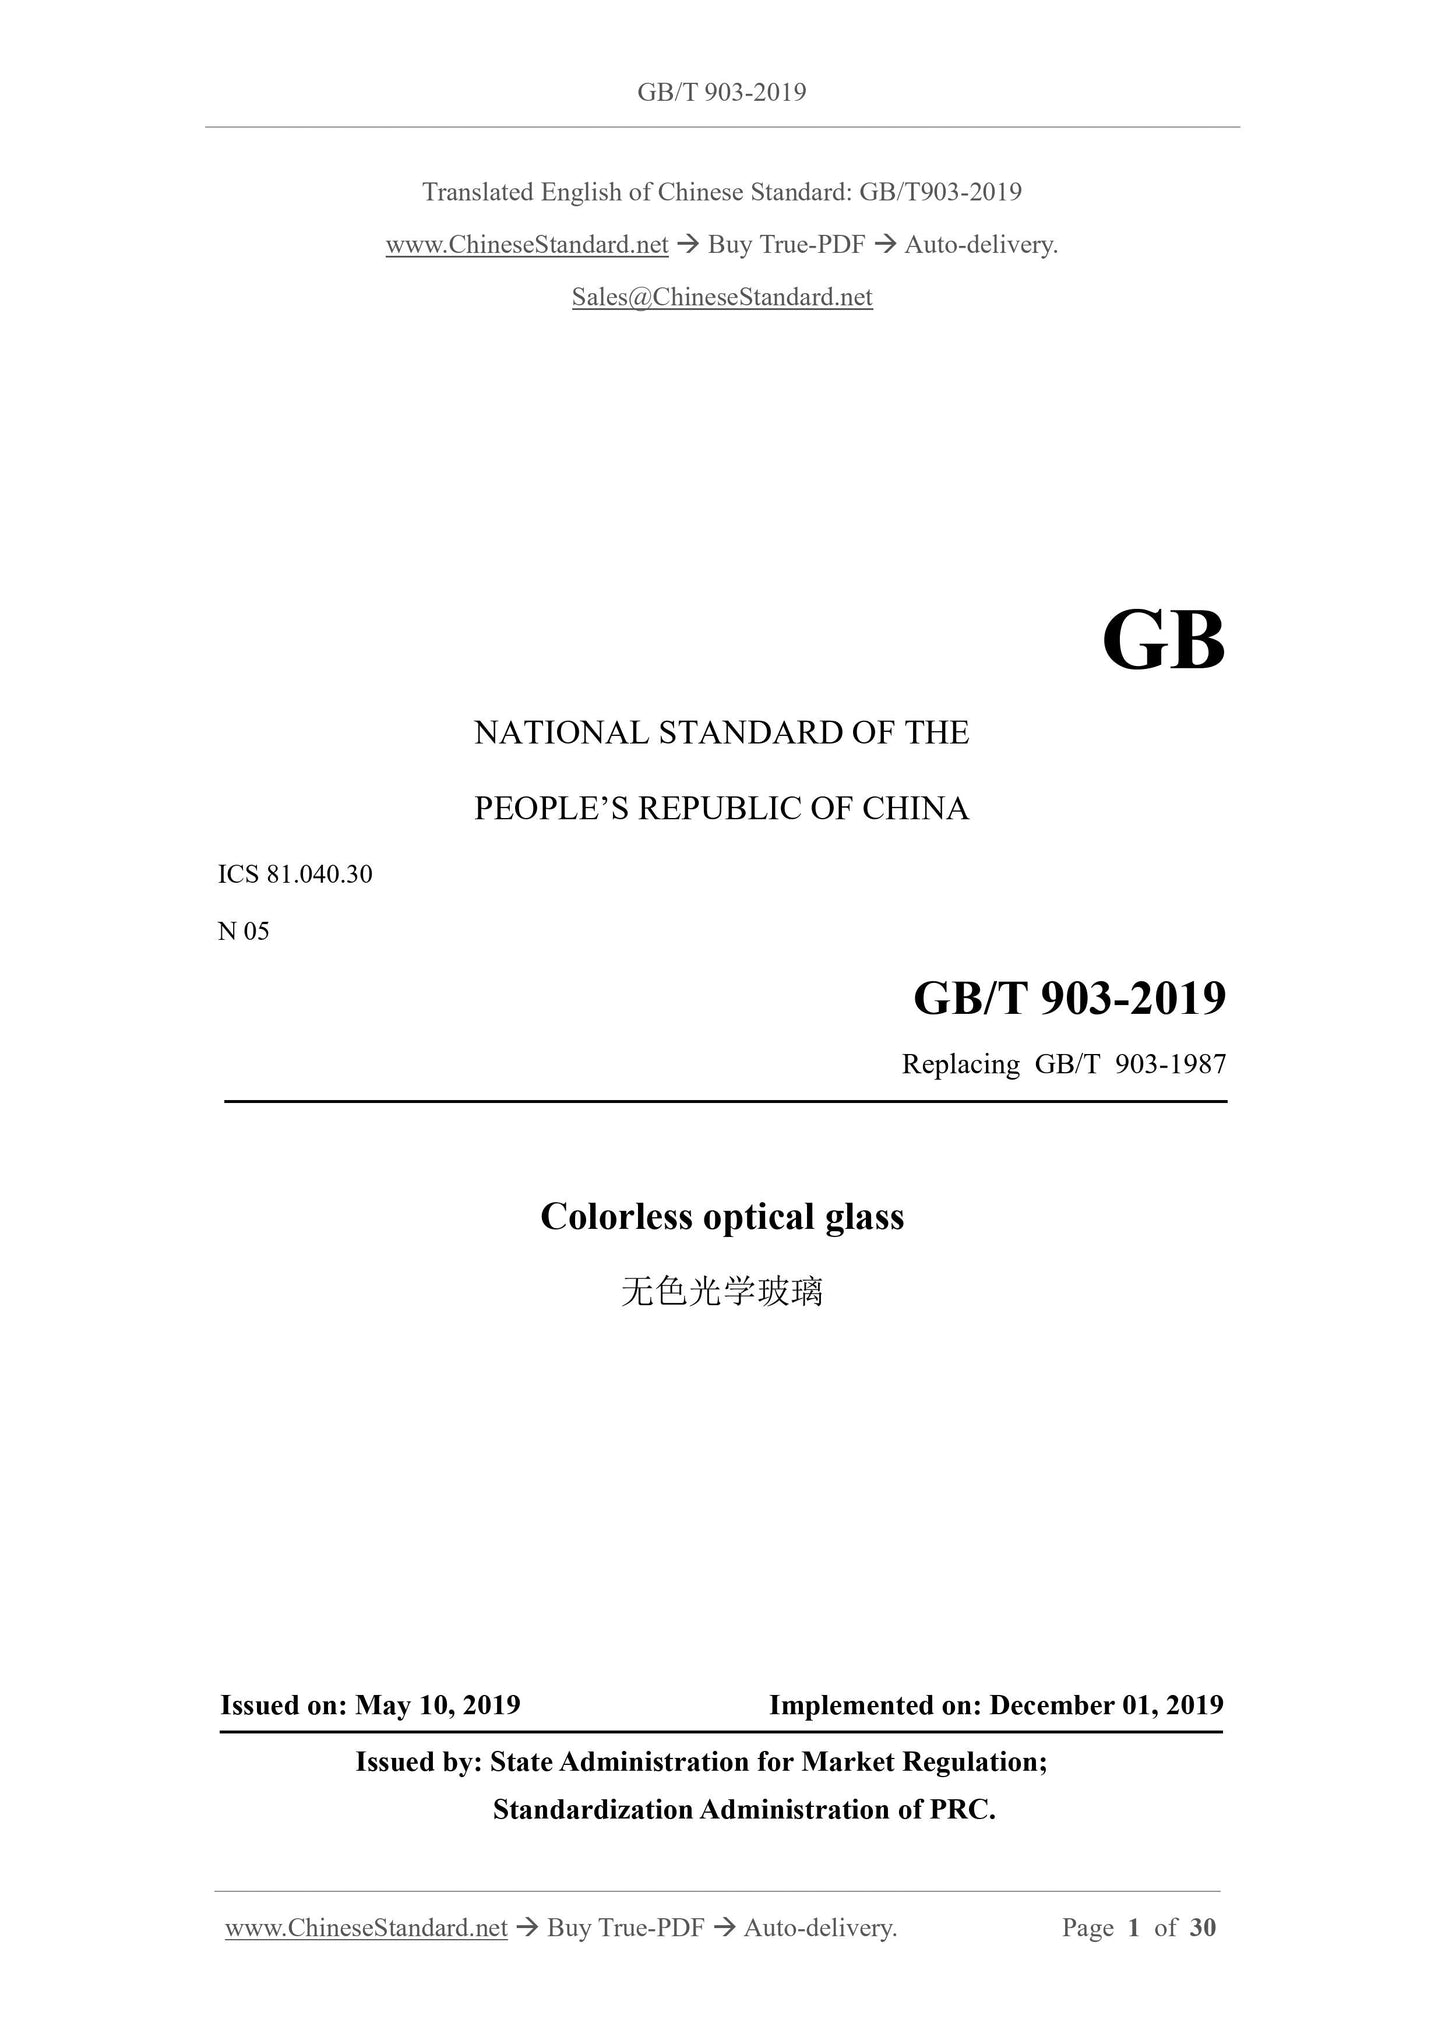 GB/T 903-2019 Page 1